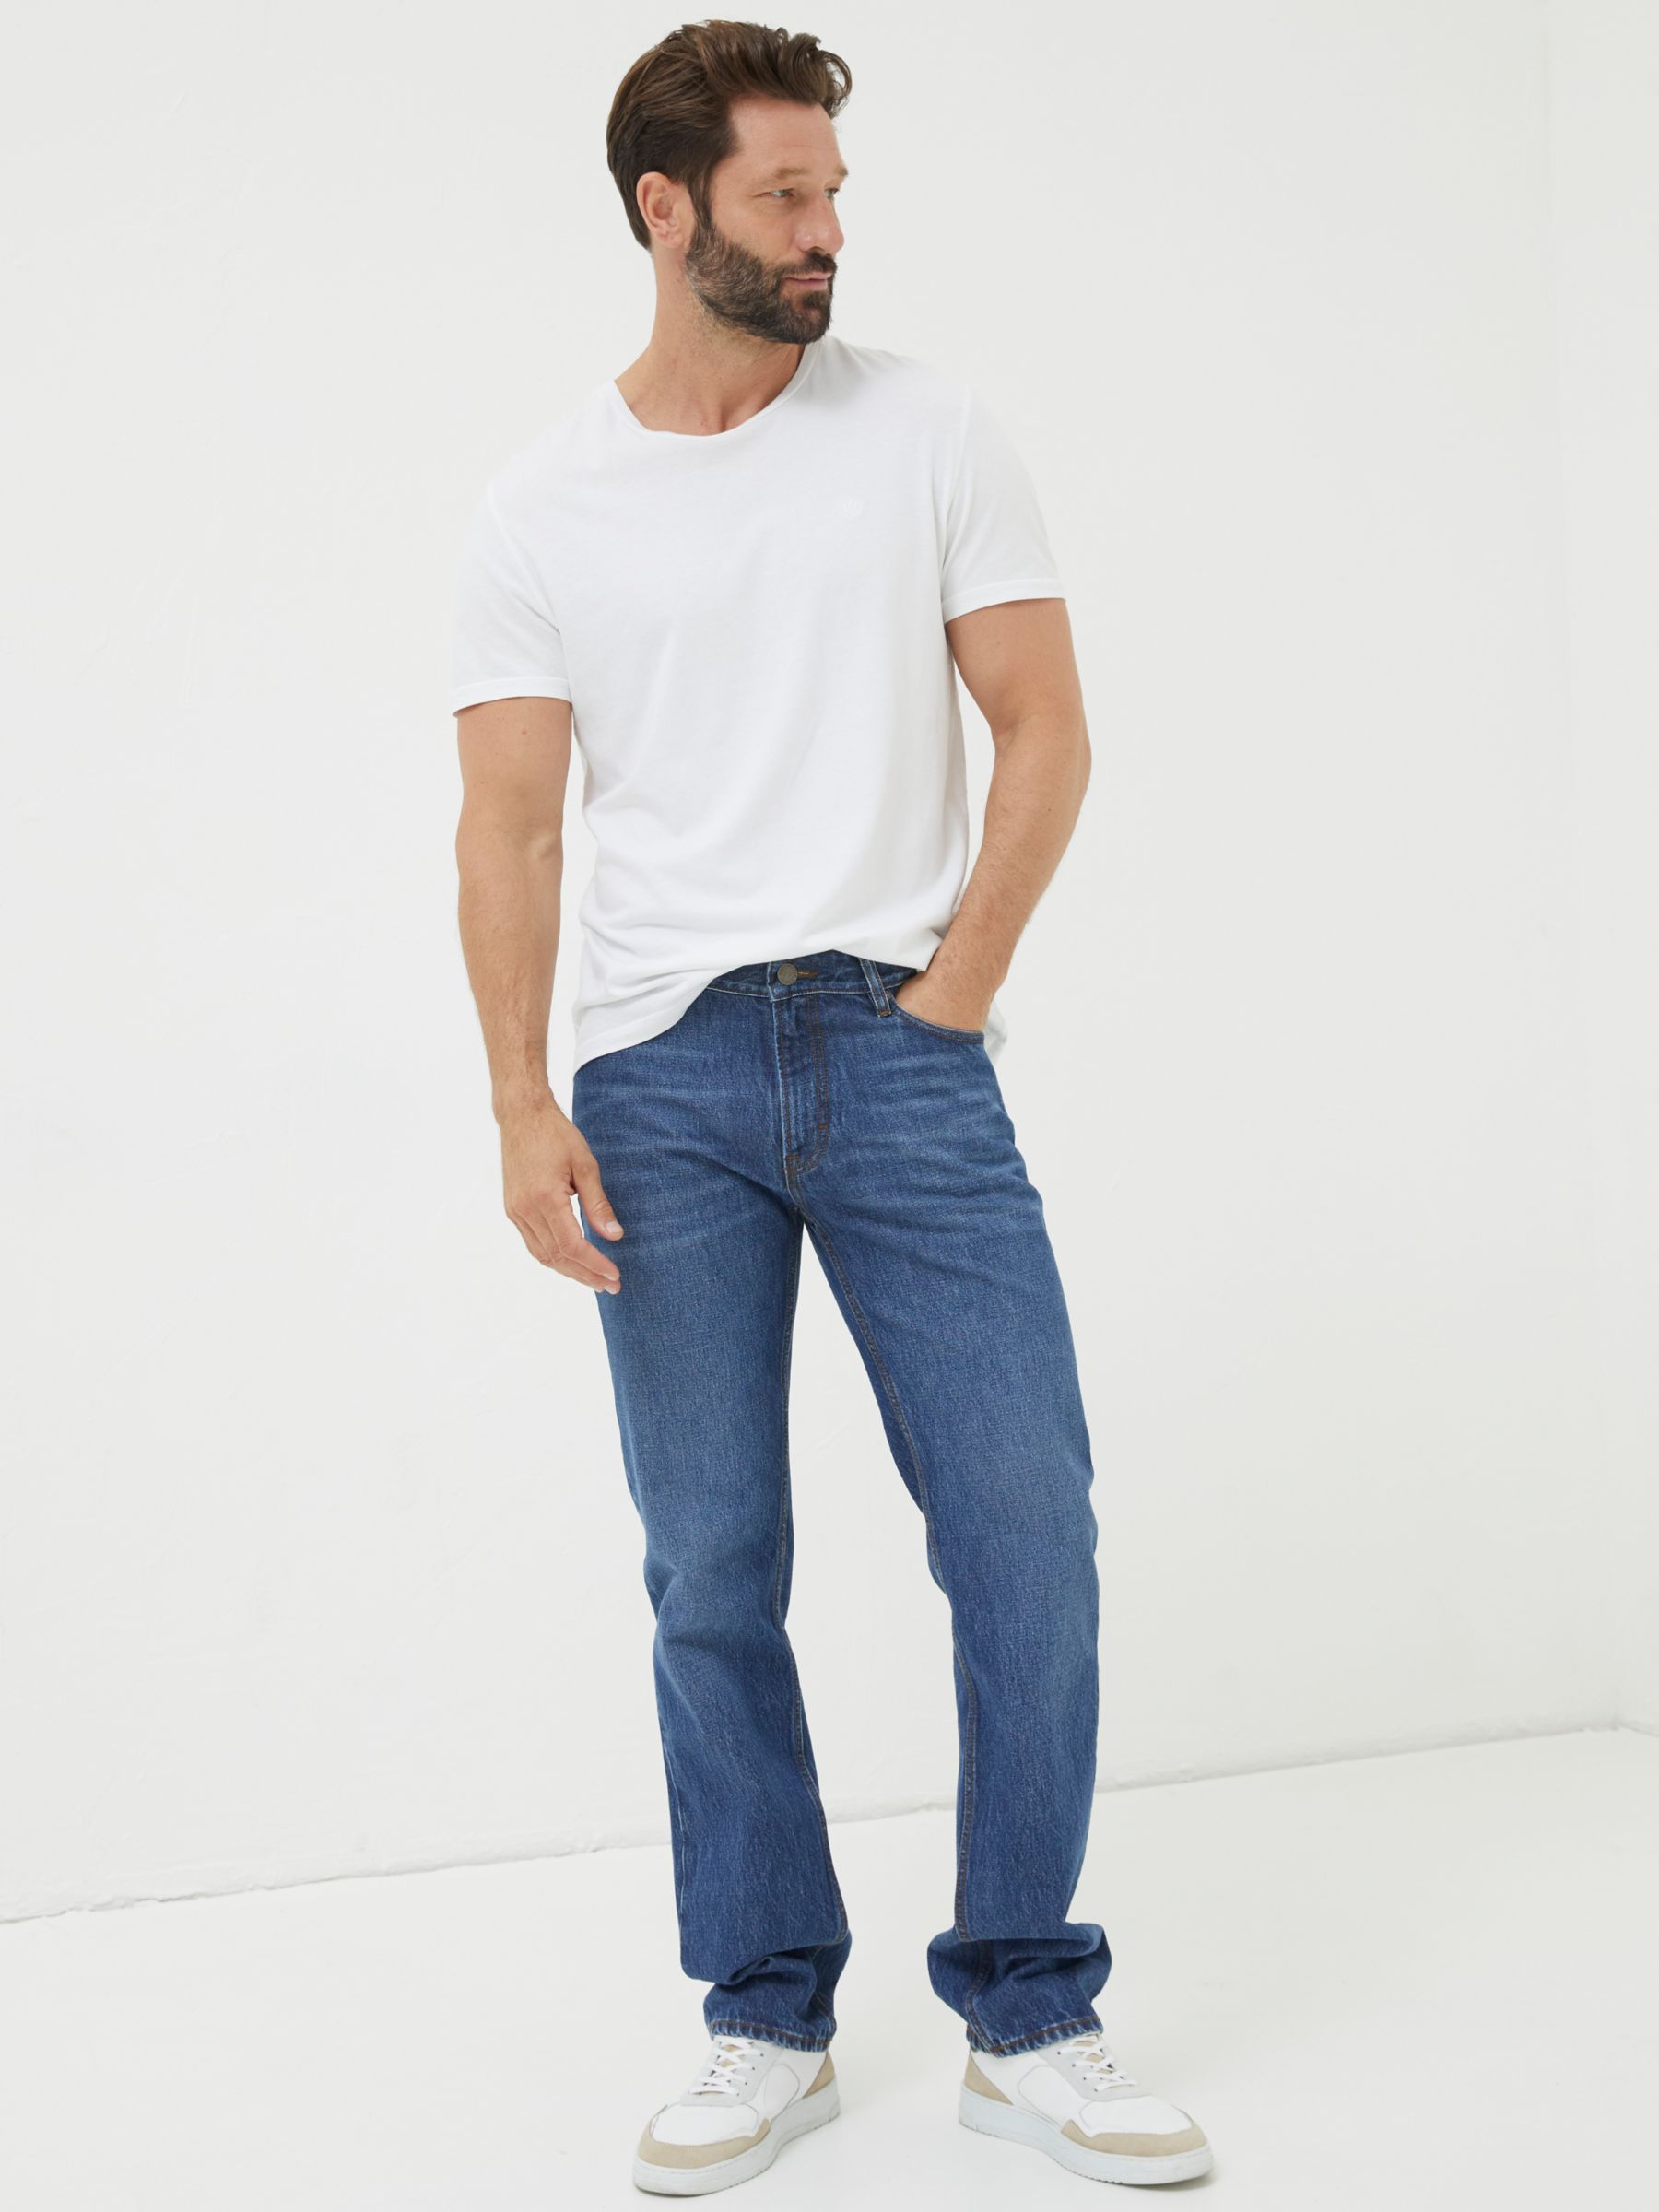 FatFace Straight Leg Jeans, Blue Stone Wash at John Lewis & Partners